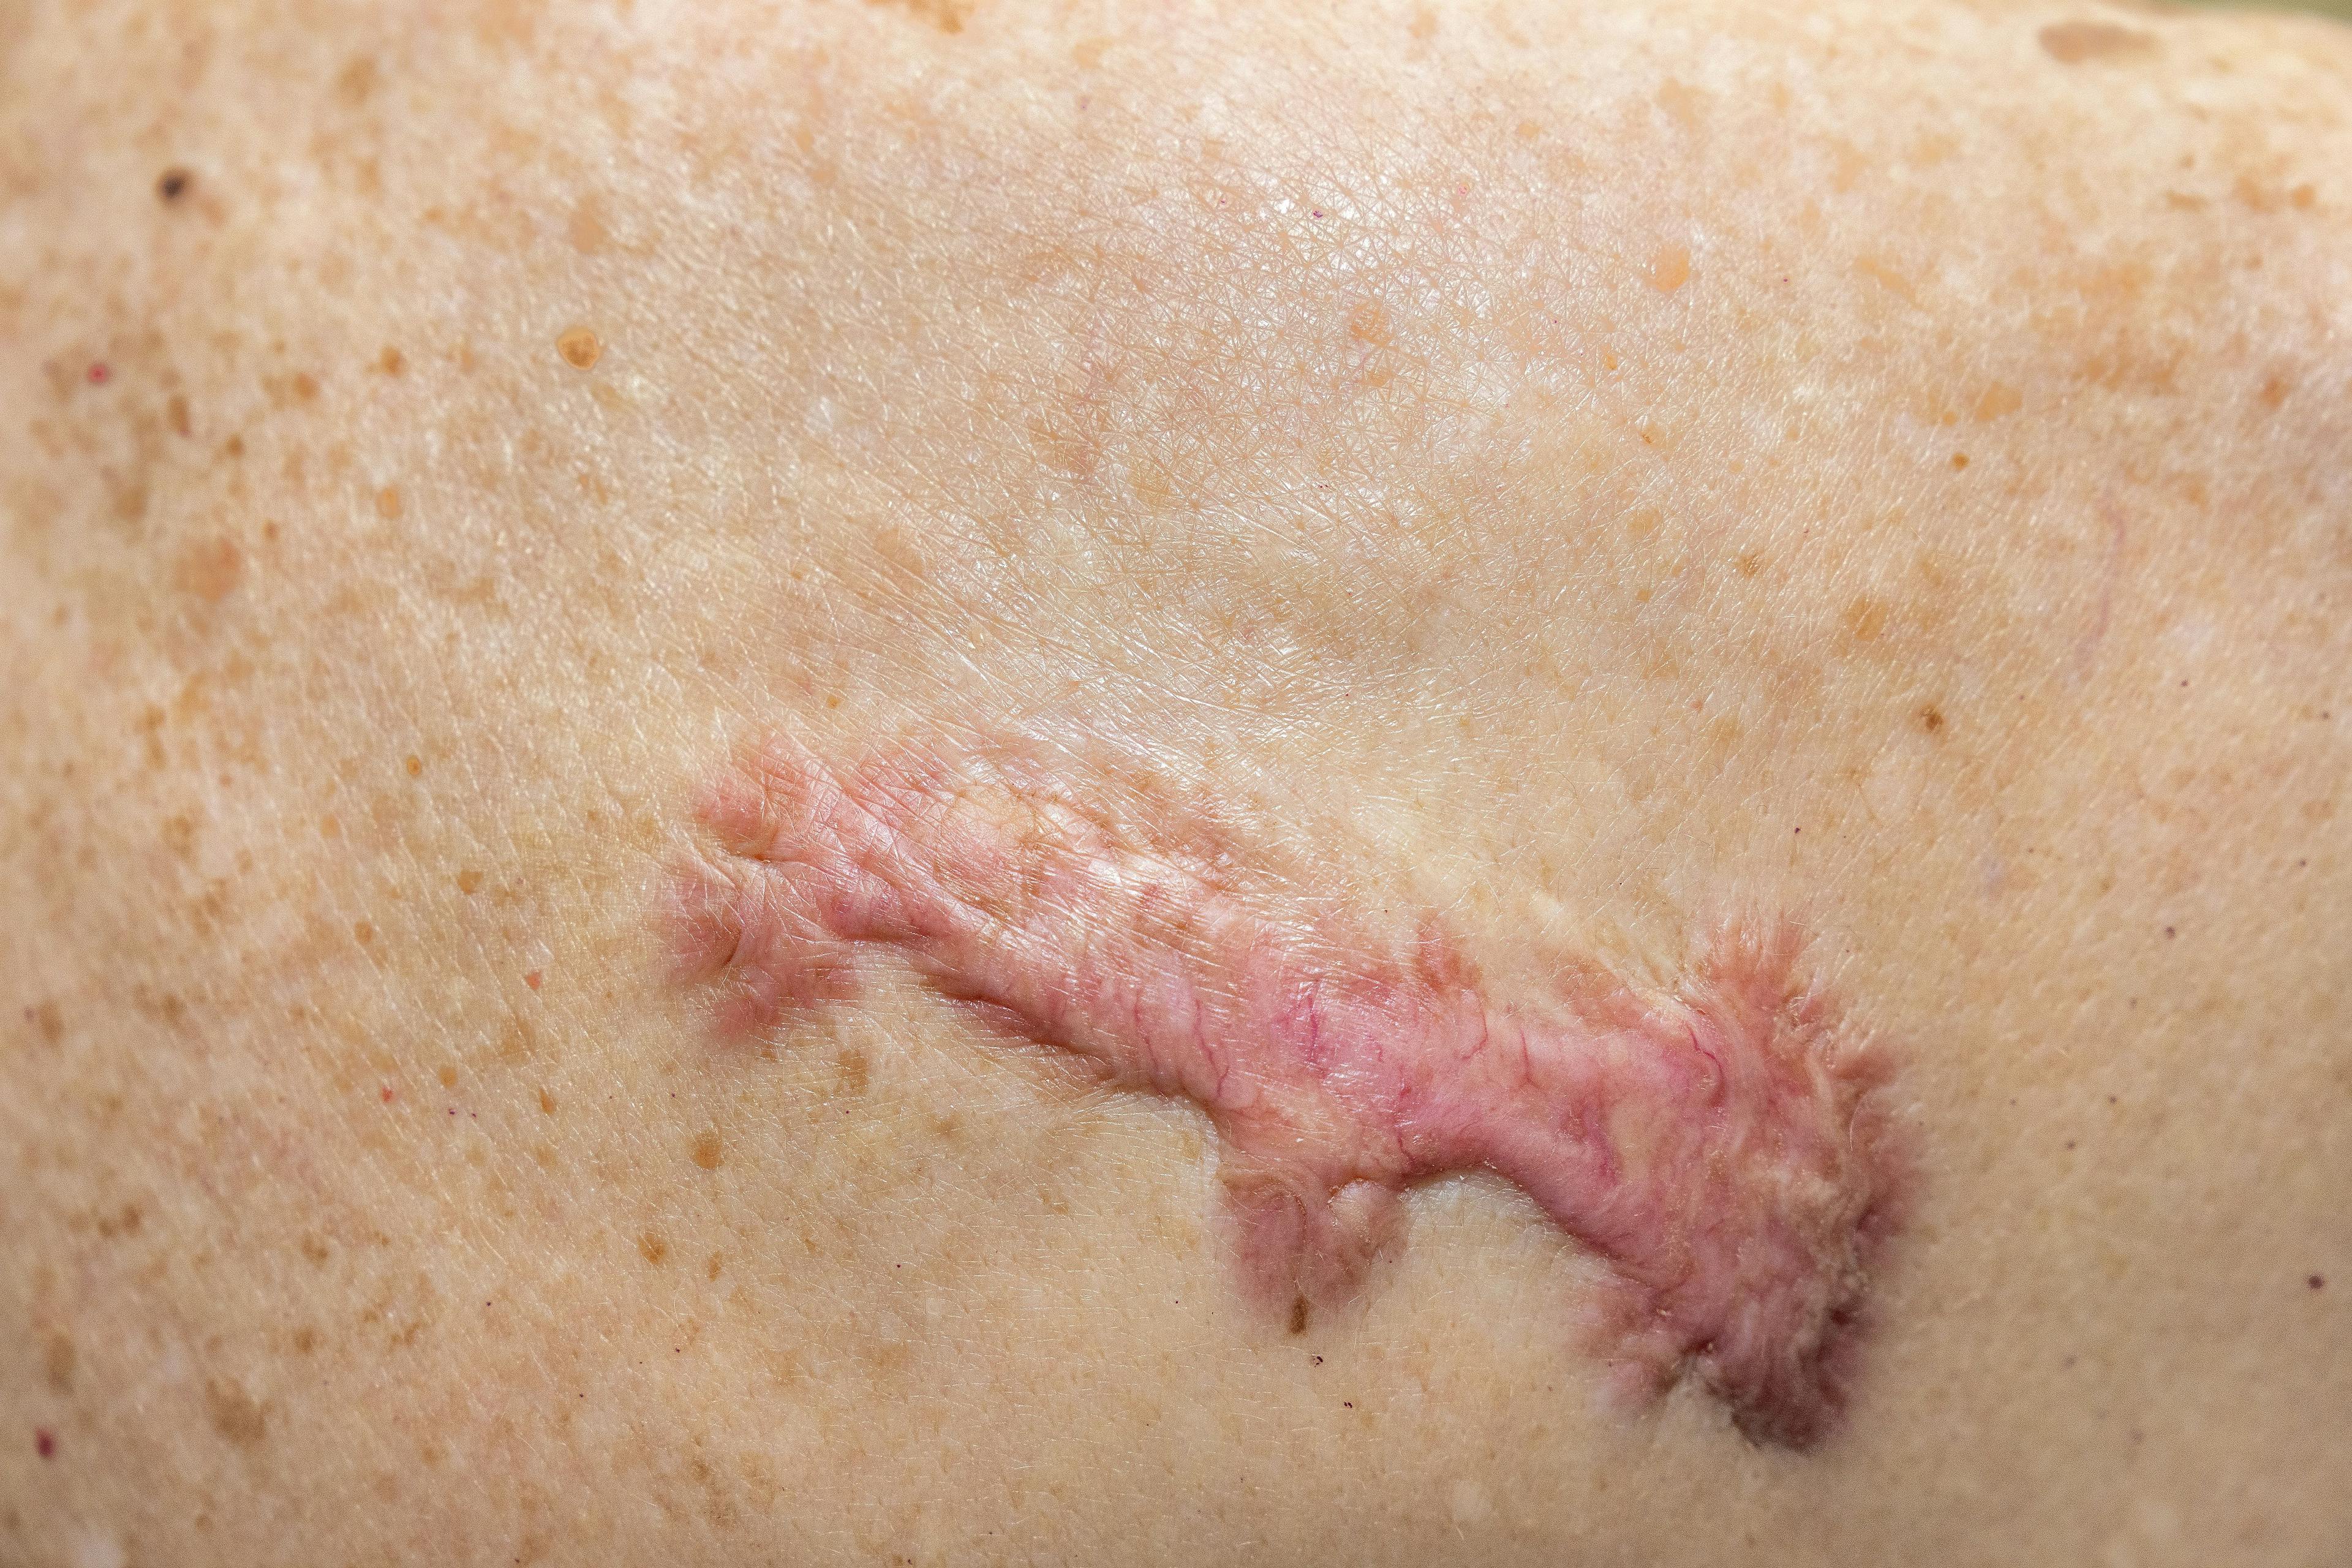 Electroablation Plus Pharmacotherapy Leads to Reduction in Keloid Volume